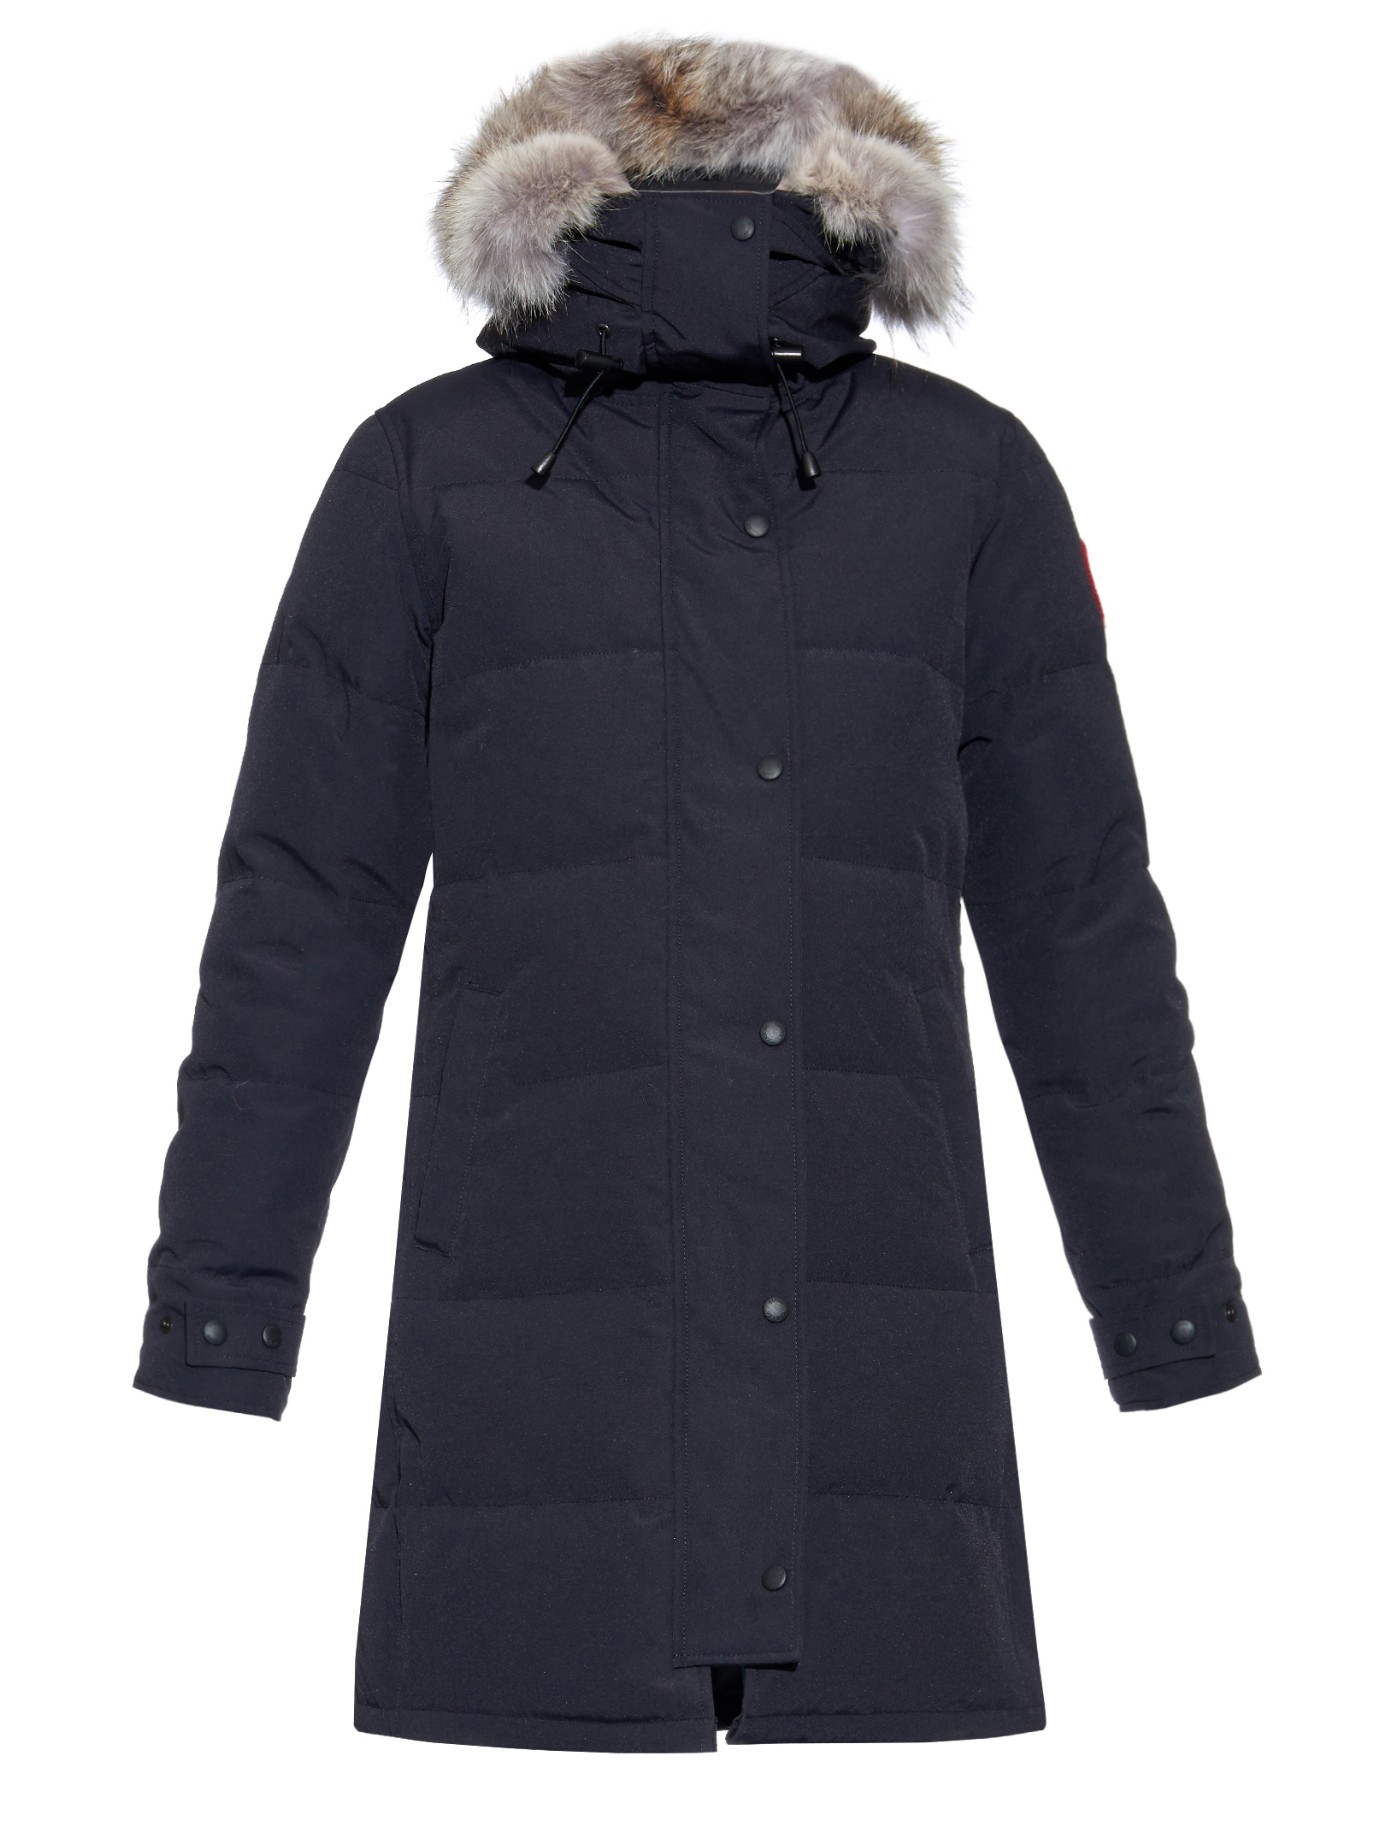 Canada Goose hats sale cheap - Canada goose Shelburne Fur-trimmed Down Parka in Blue (NAVY) | Lyst